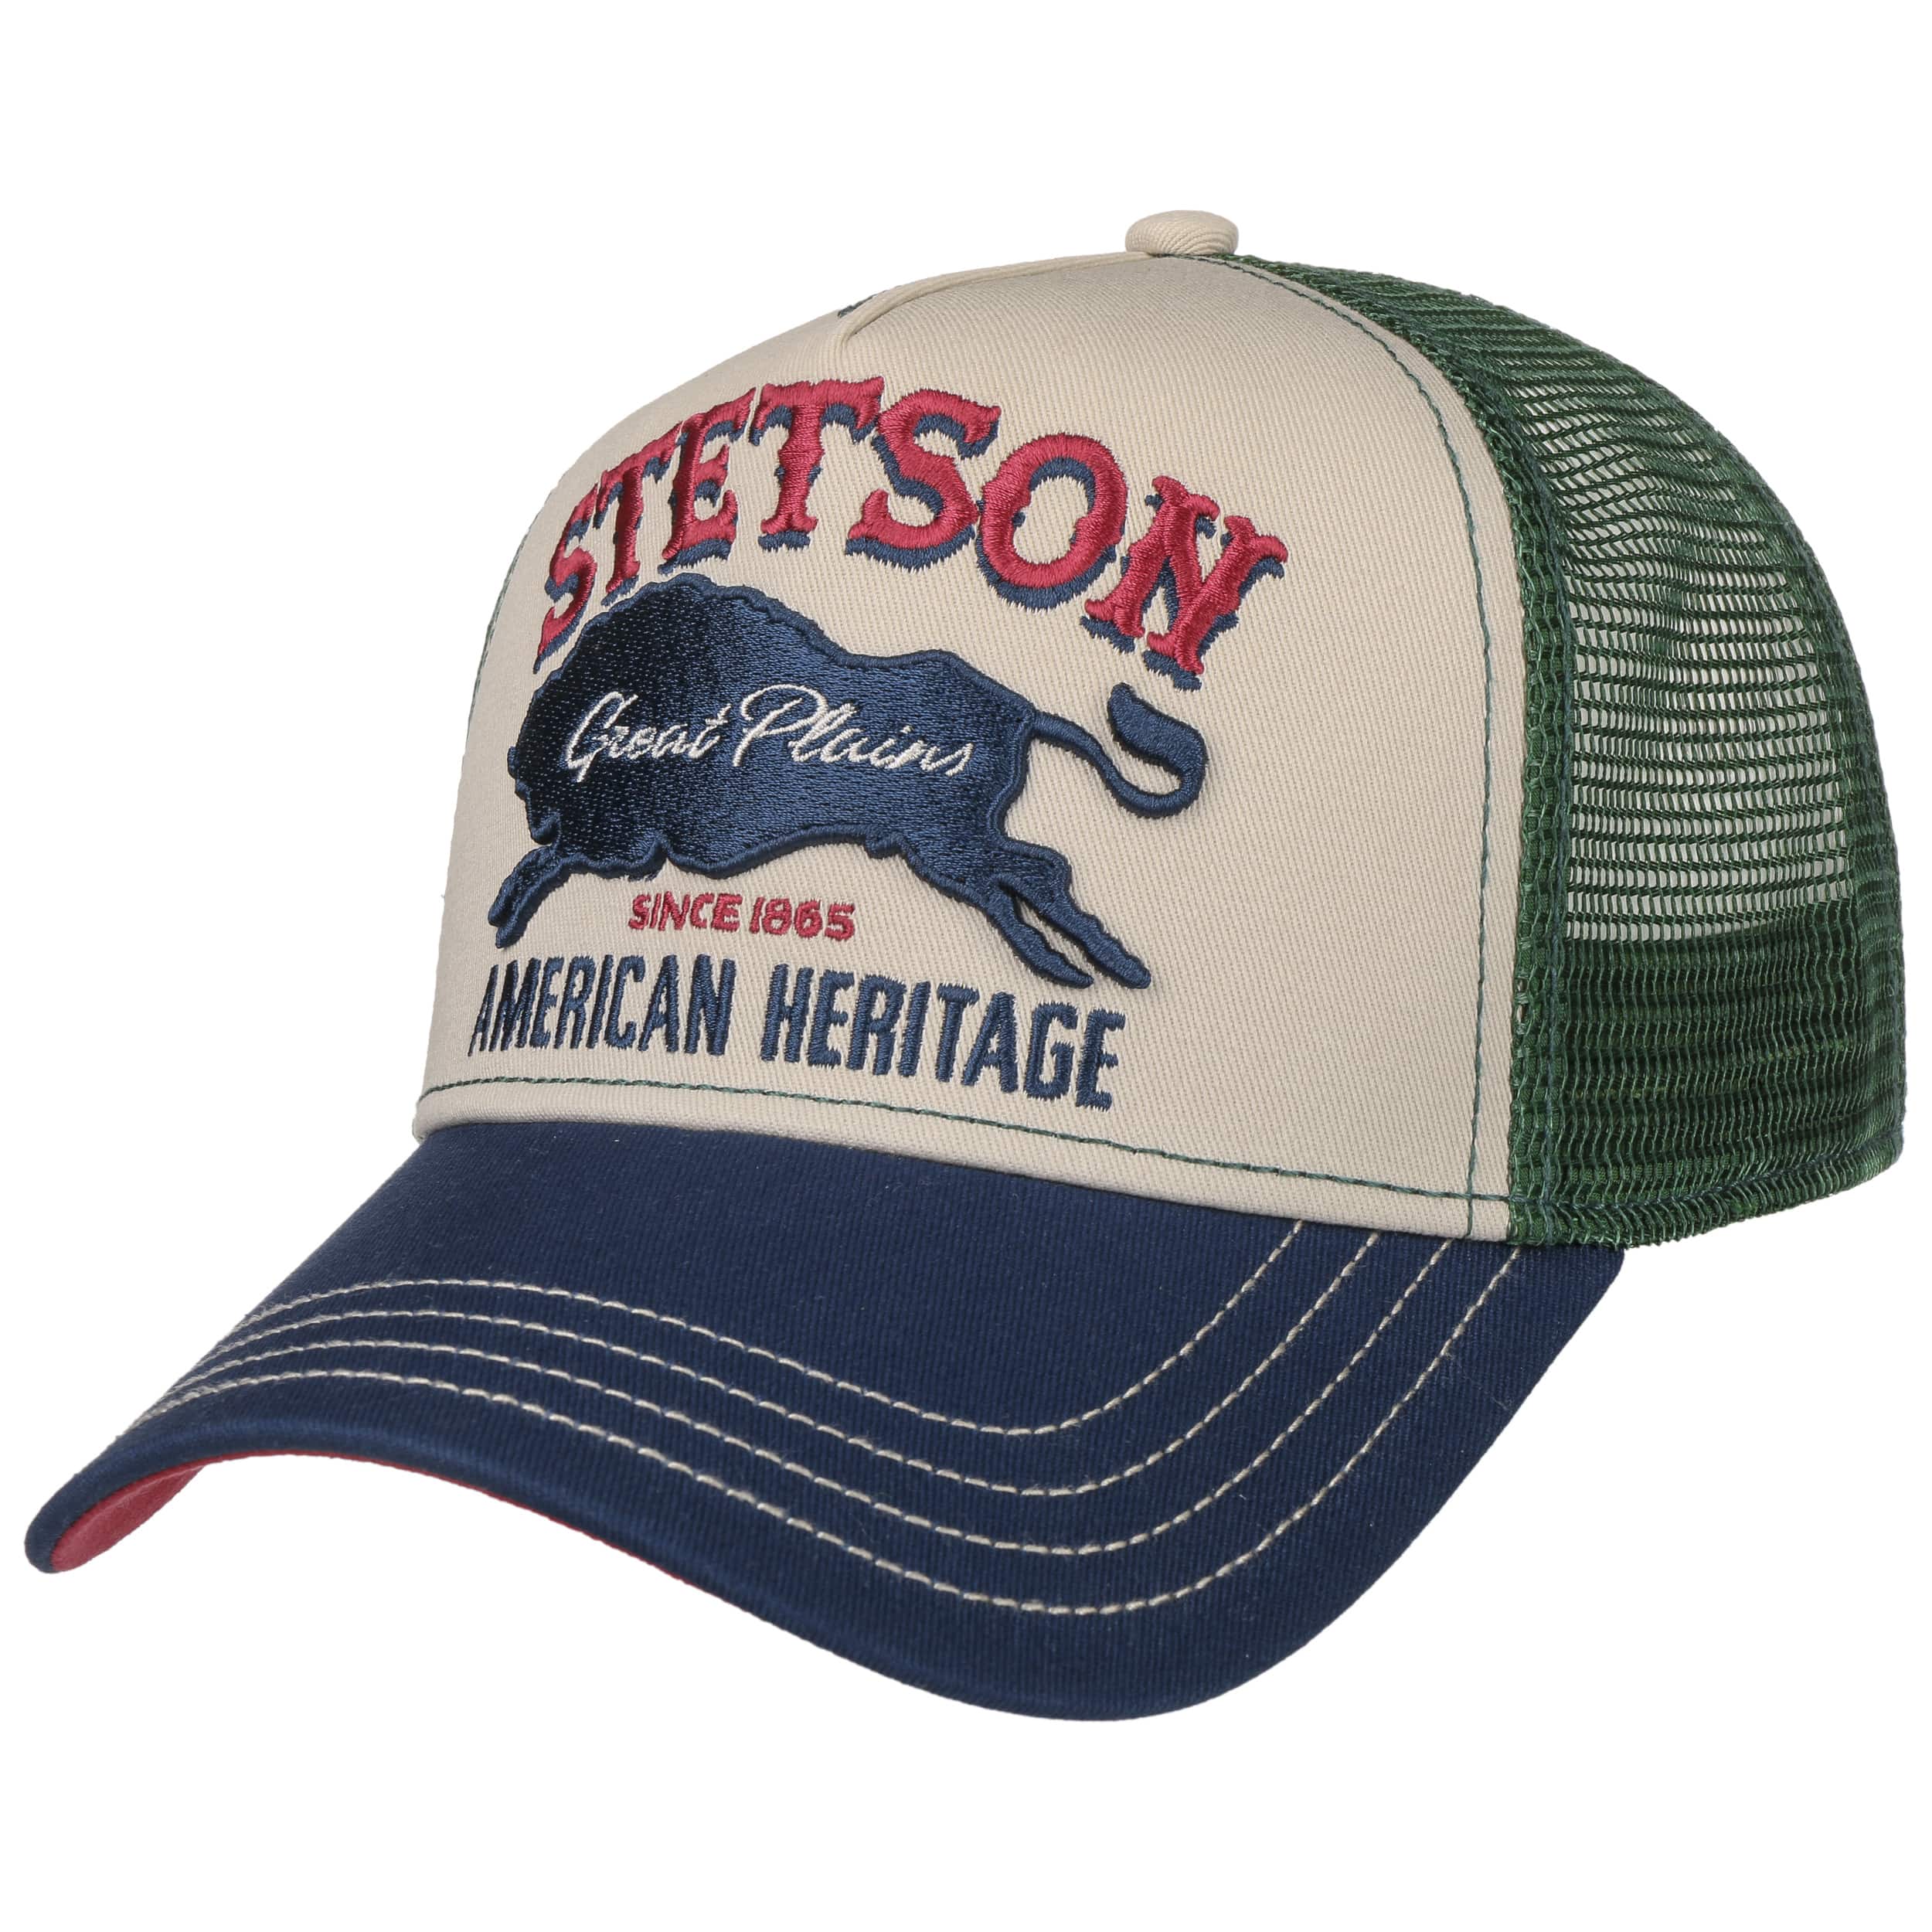 The Plains by Stetson - 39,00 €